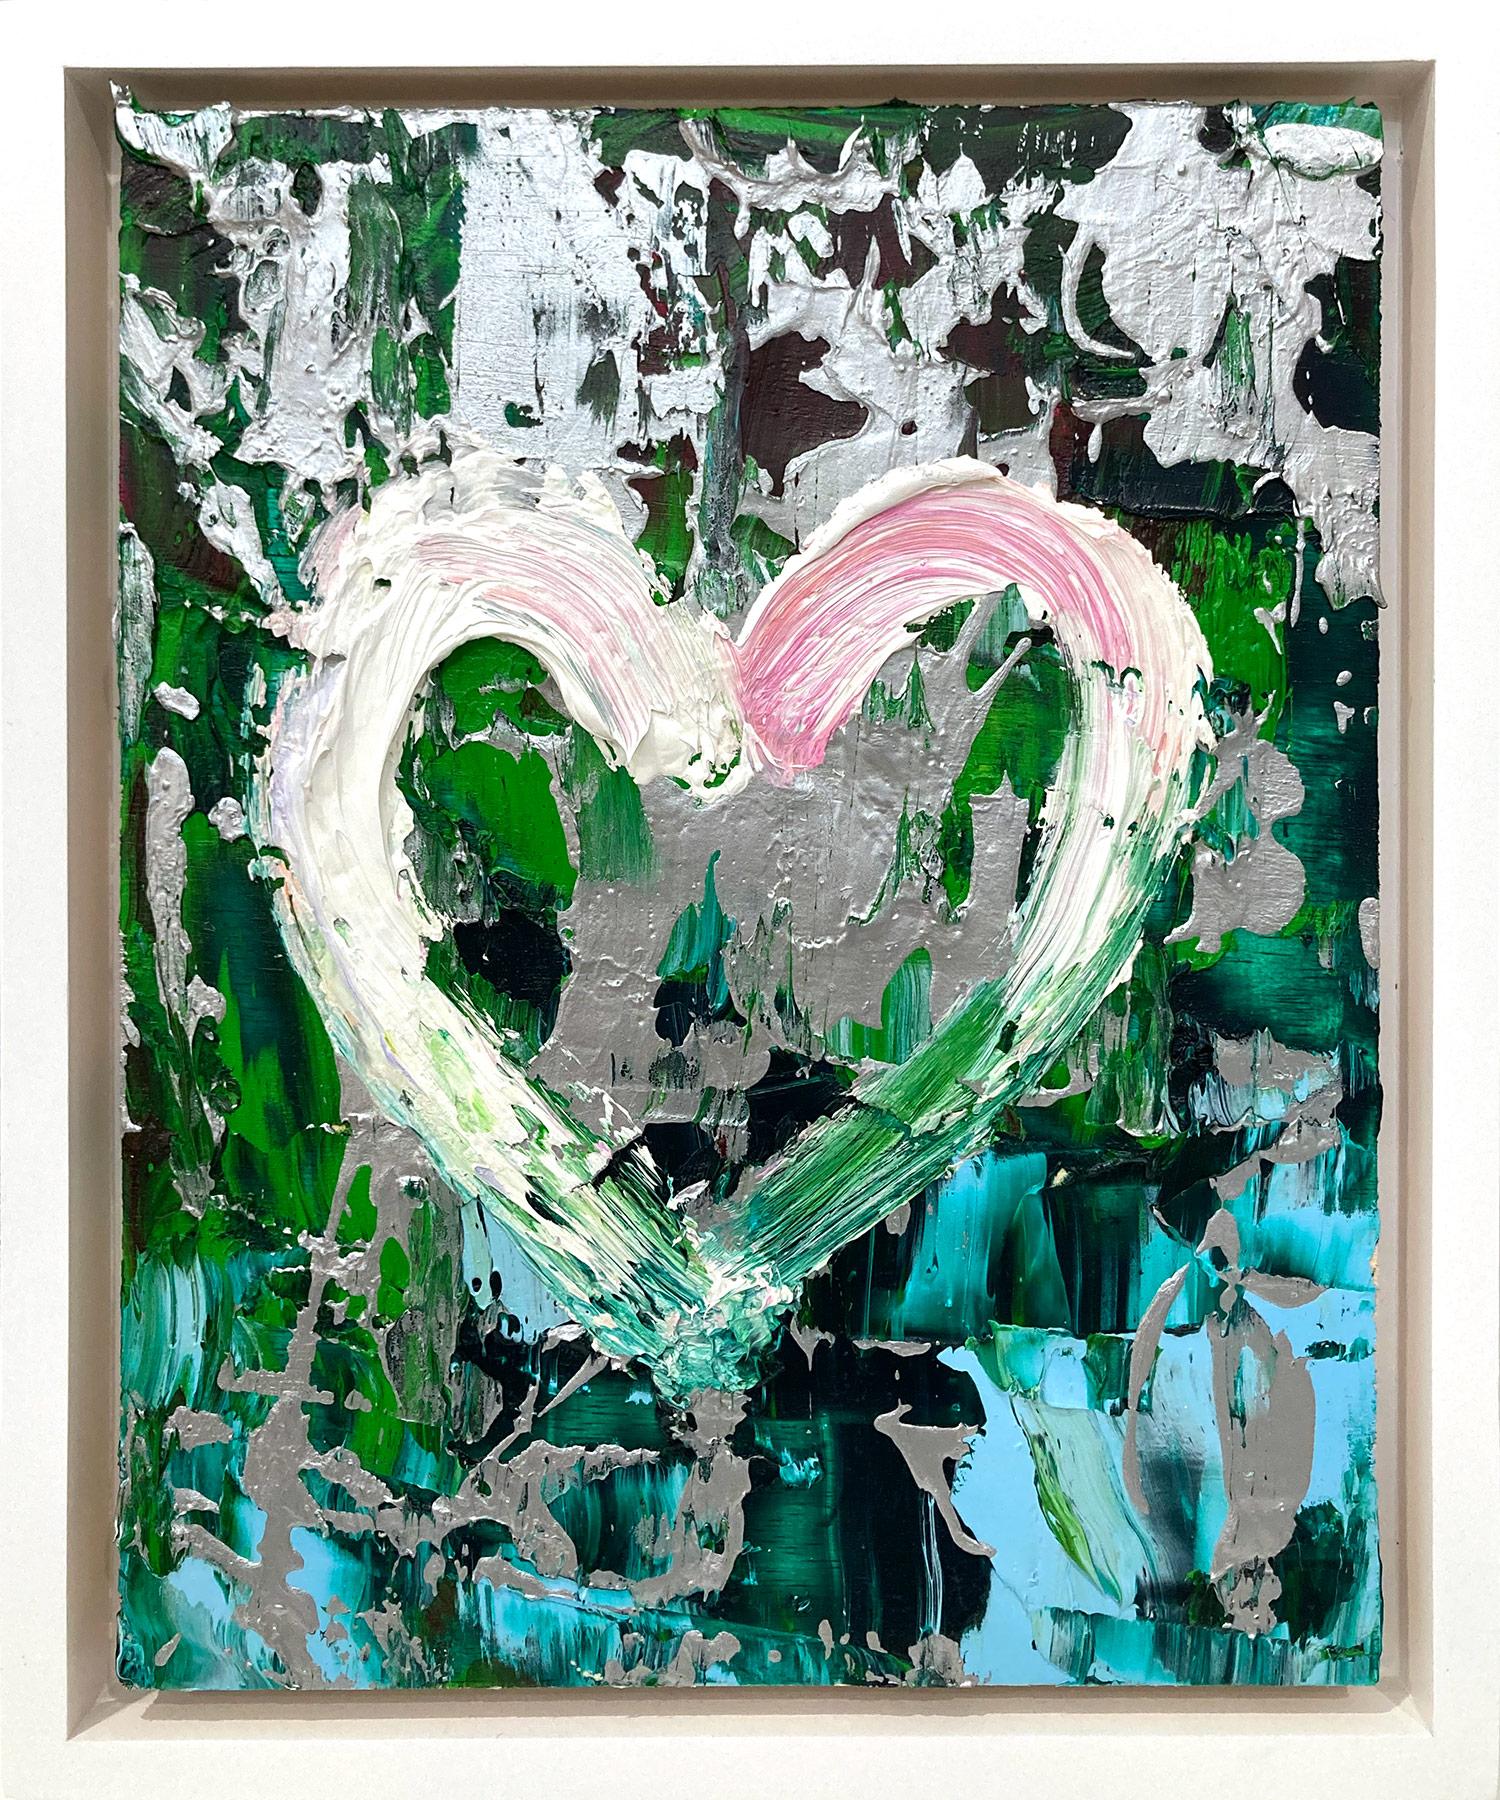 Cindy Shaoul Figurative Painting - "My Wild at Heart" Green & Silver Pop Art Oil Painting with White Floater Frame